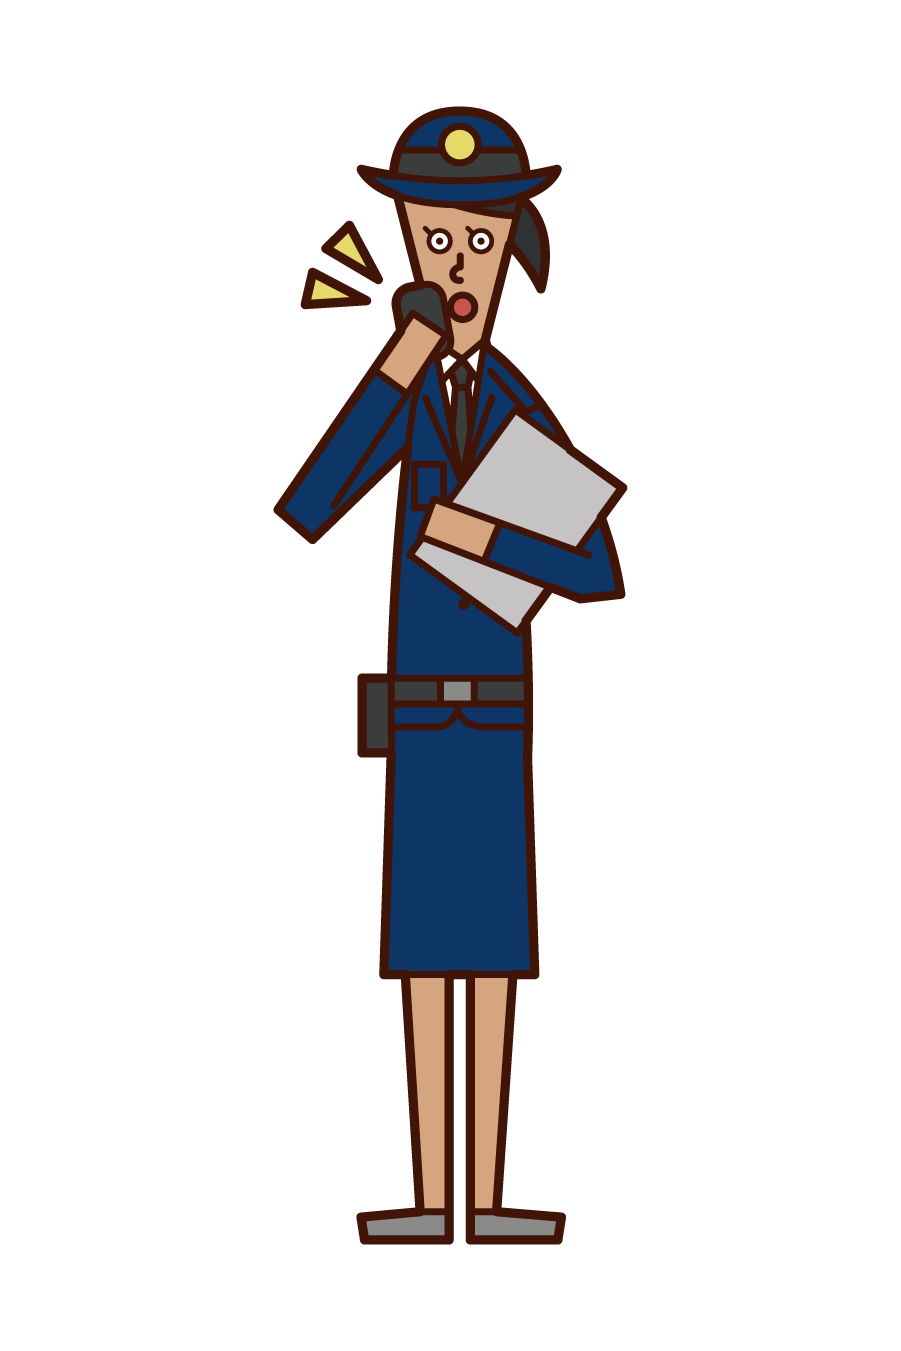 Illustration of a police officer (woman) calling